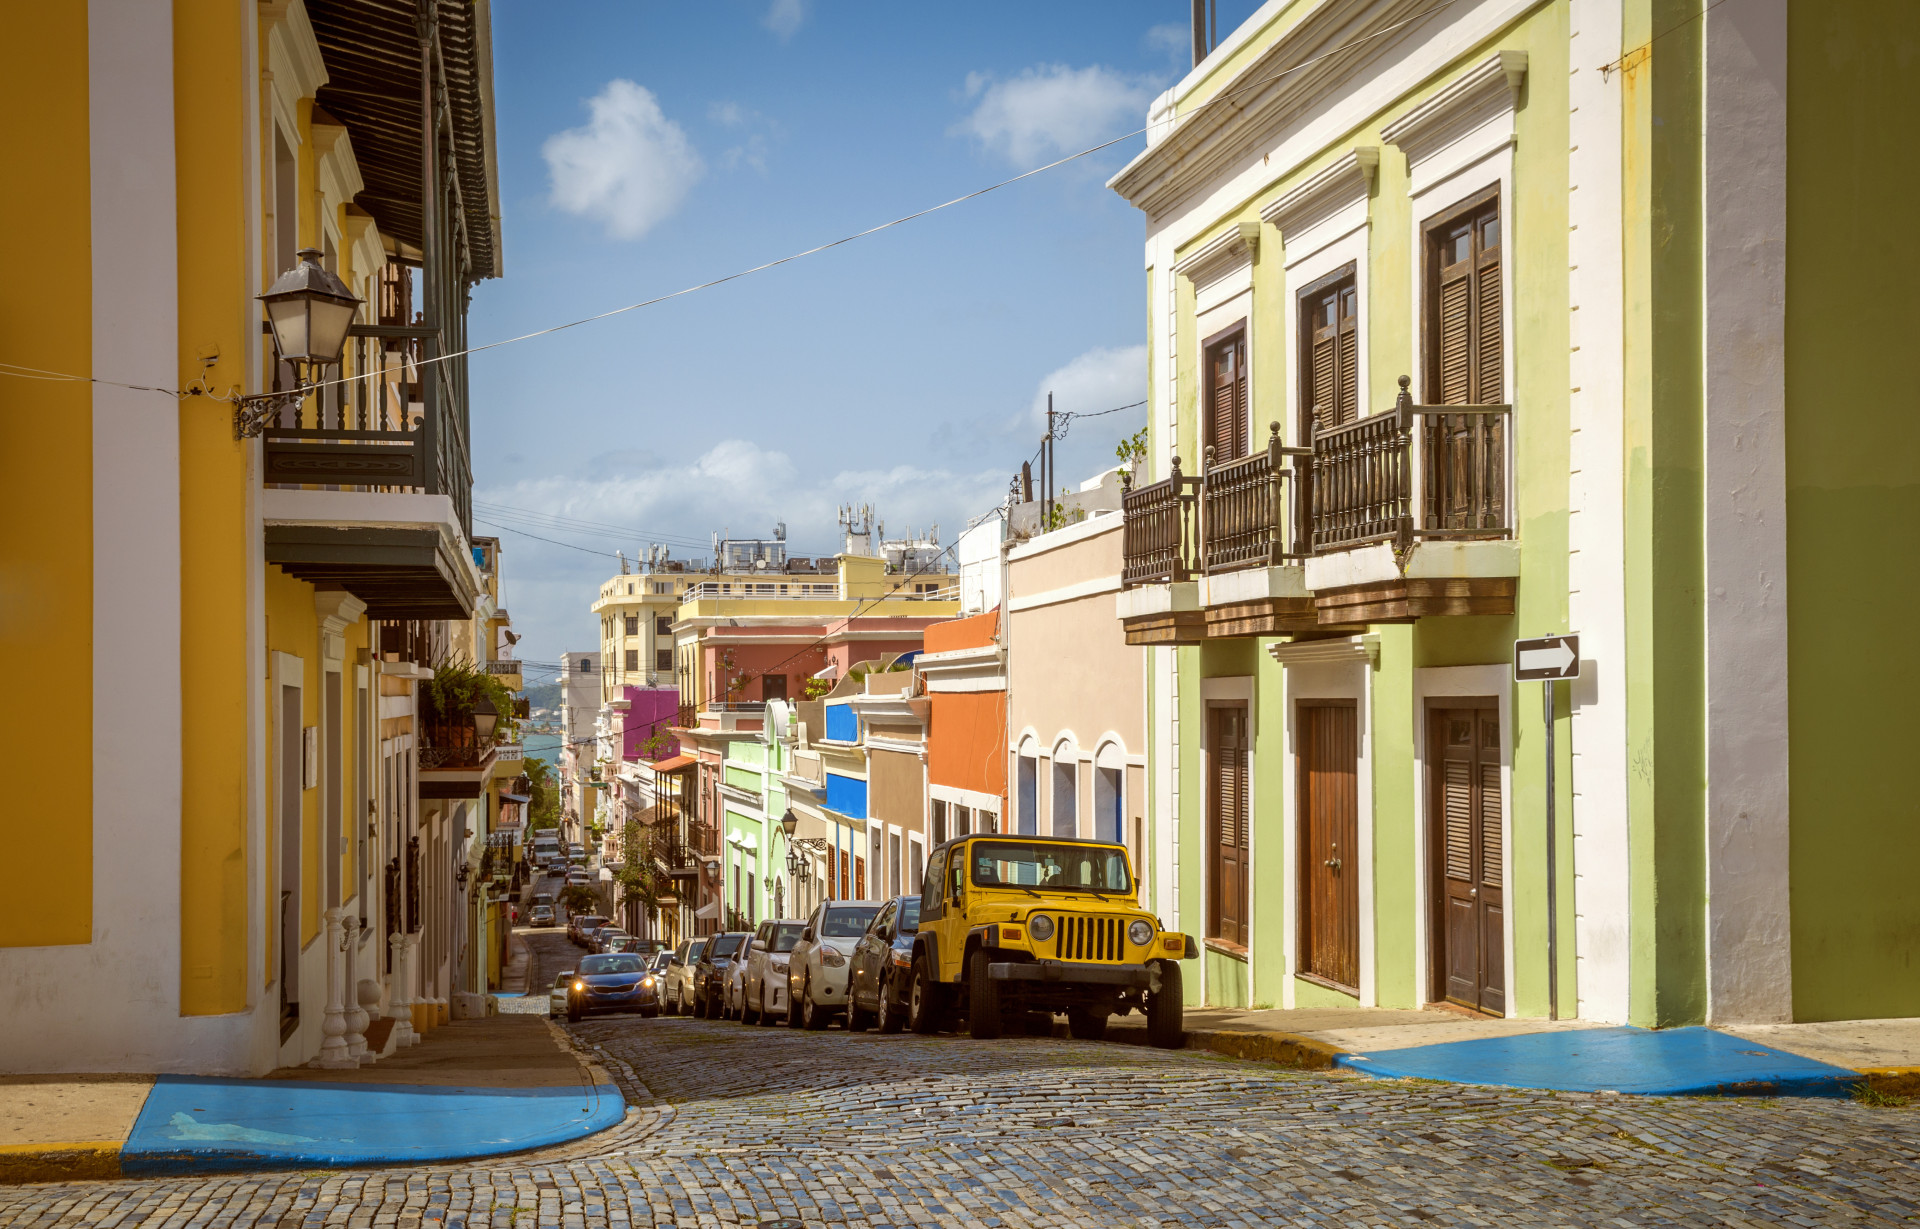 The twisting cobblestone streets of Old San Juan will take you back in time. Puerto Rico’s capital houses beautiful pastel colonial architecture from the 16th and 17th centuries, as well as old Spanish military forts. Don’t forget to grab a piña colada! San Juan is the drink’s birthplace, after all.<p>You may also like:<a href="https://www.starsinsider.com/n/281966?utm_source=msn.com&utm_medium=display&utm_campaign=referral_description&utm_content=173131en-us"> A look at China’s most impressive knock-off wonders</a></p>